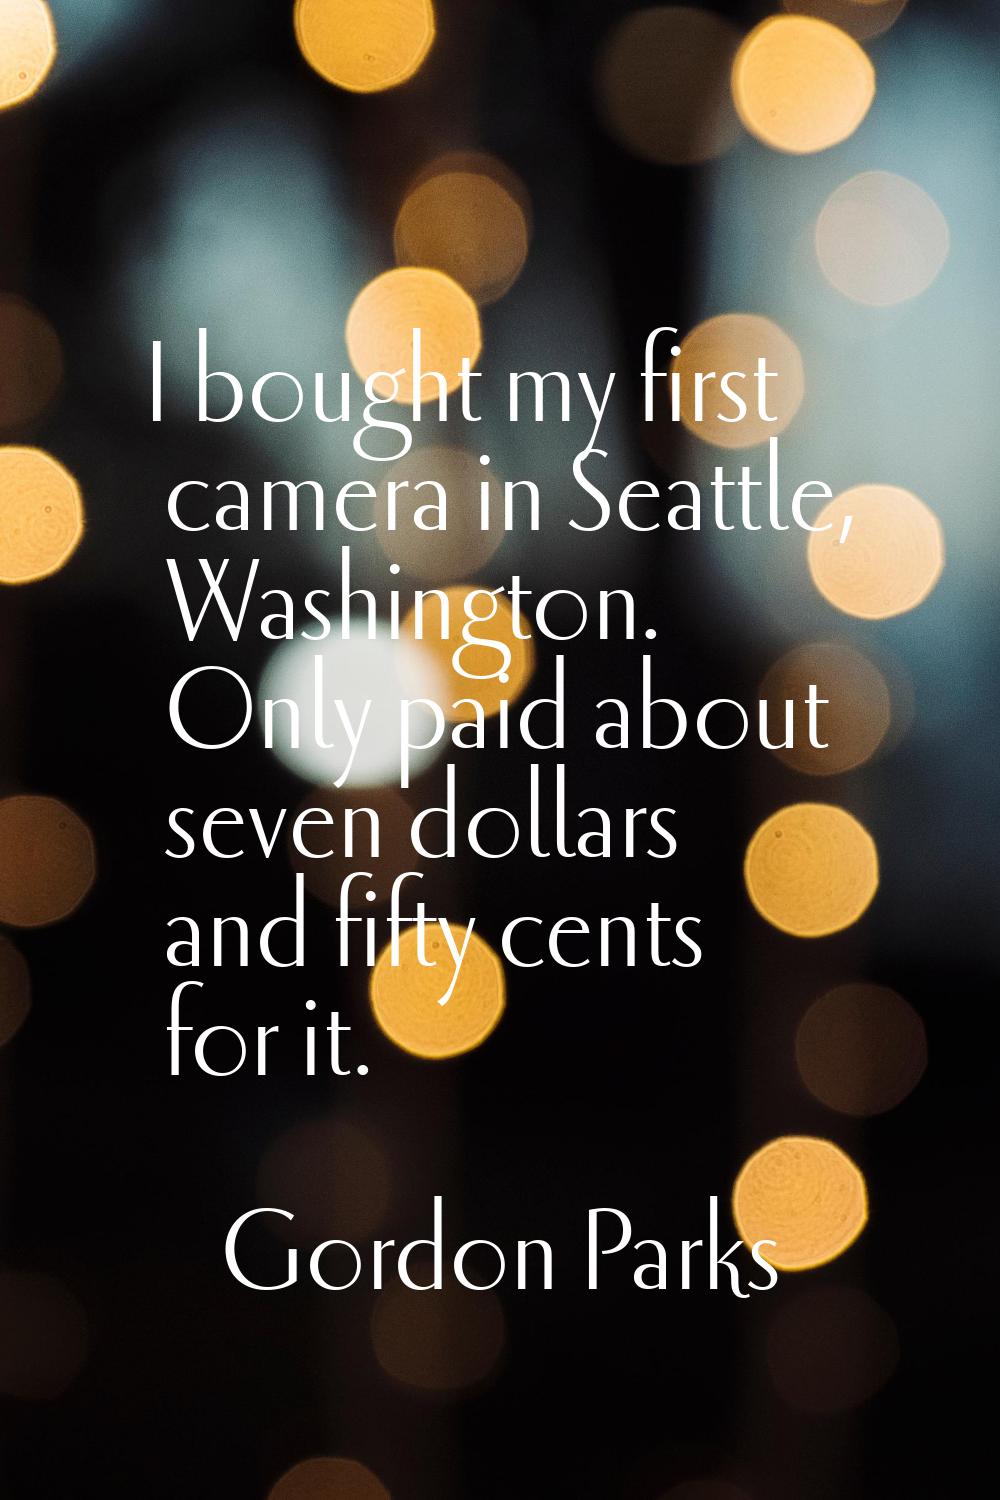 I bought my first camera in Seattle, Washington. Only paid about seven dollars and fifty cents for 